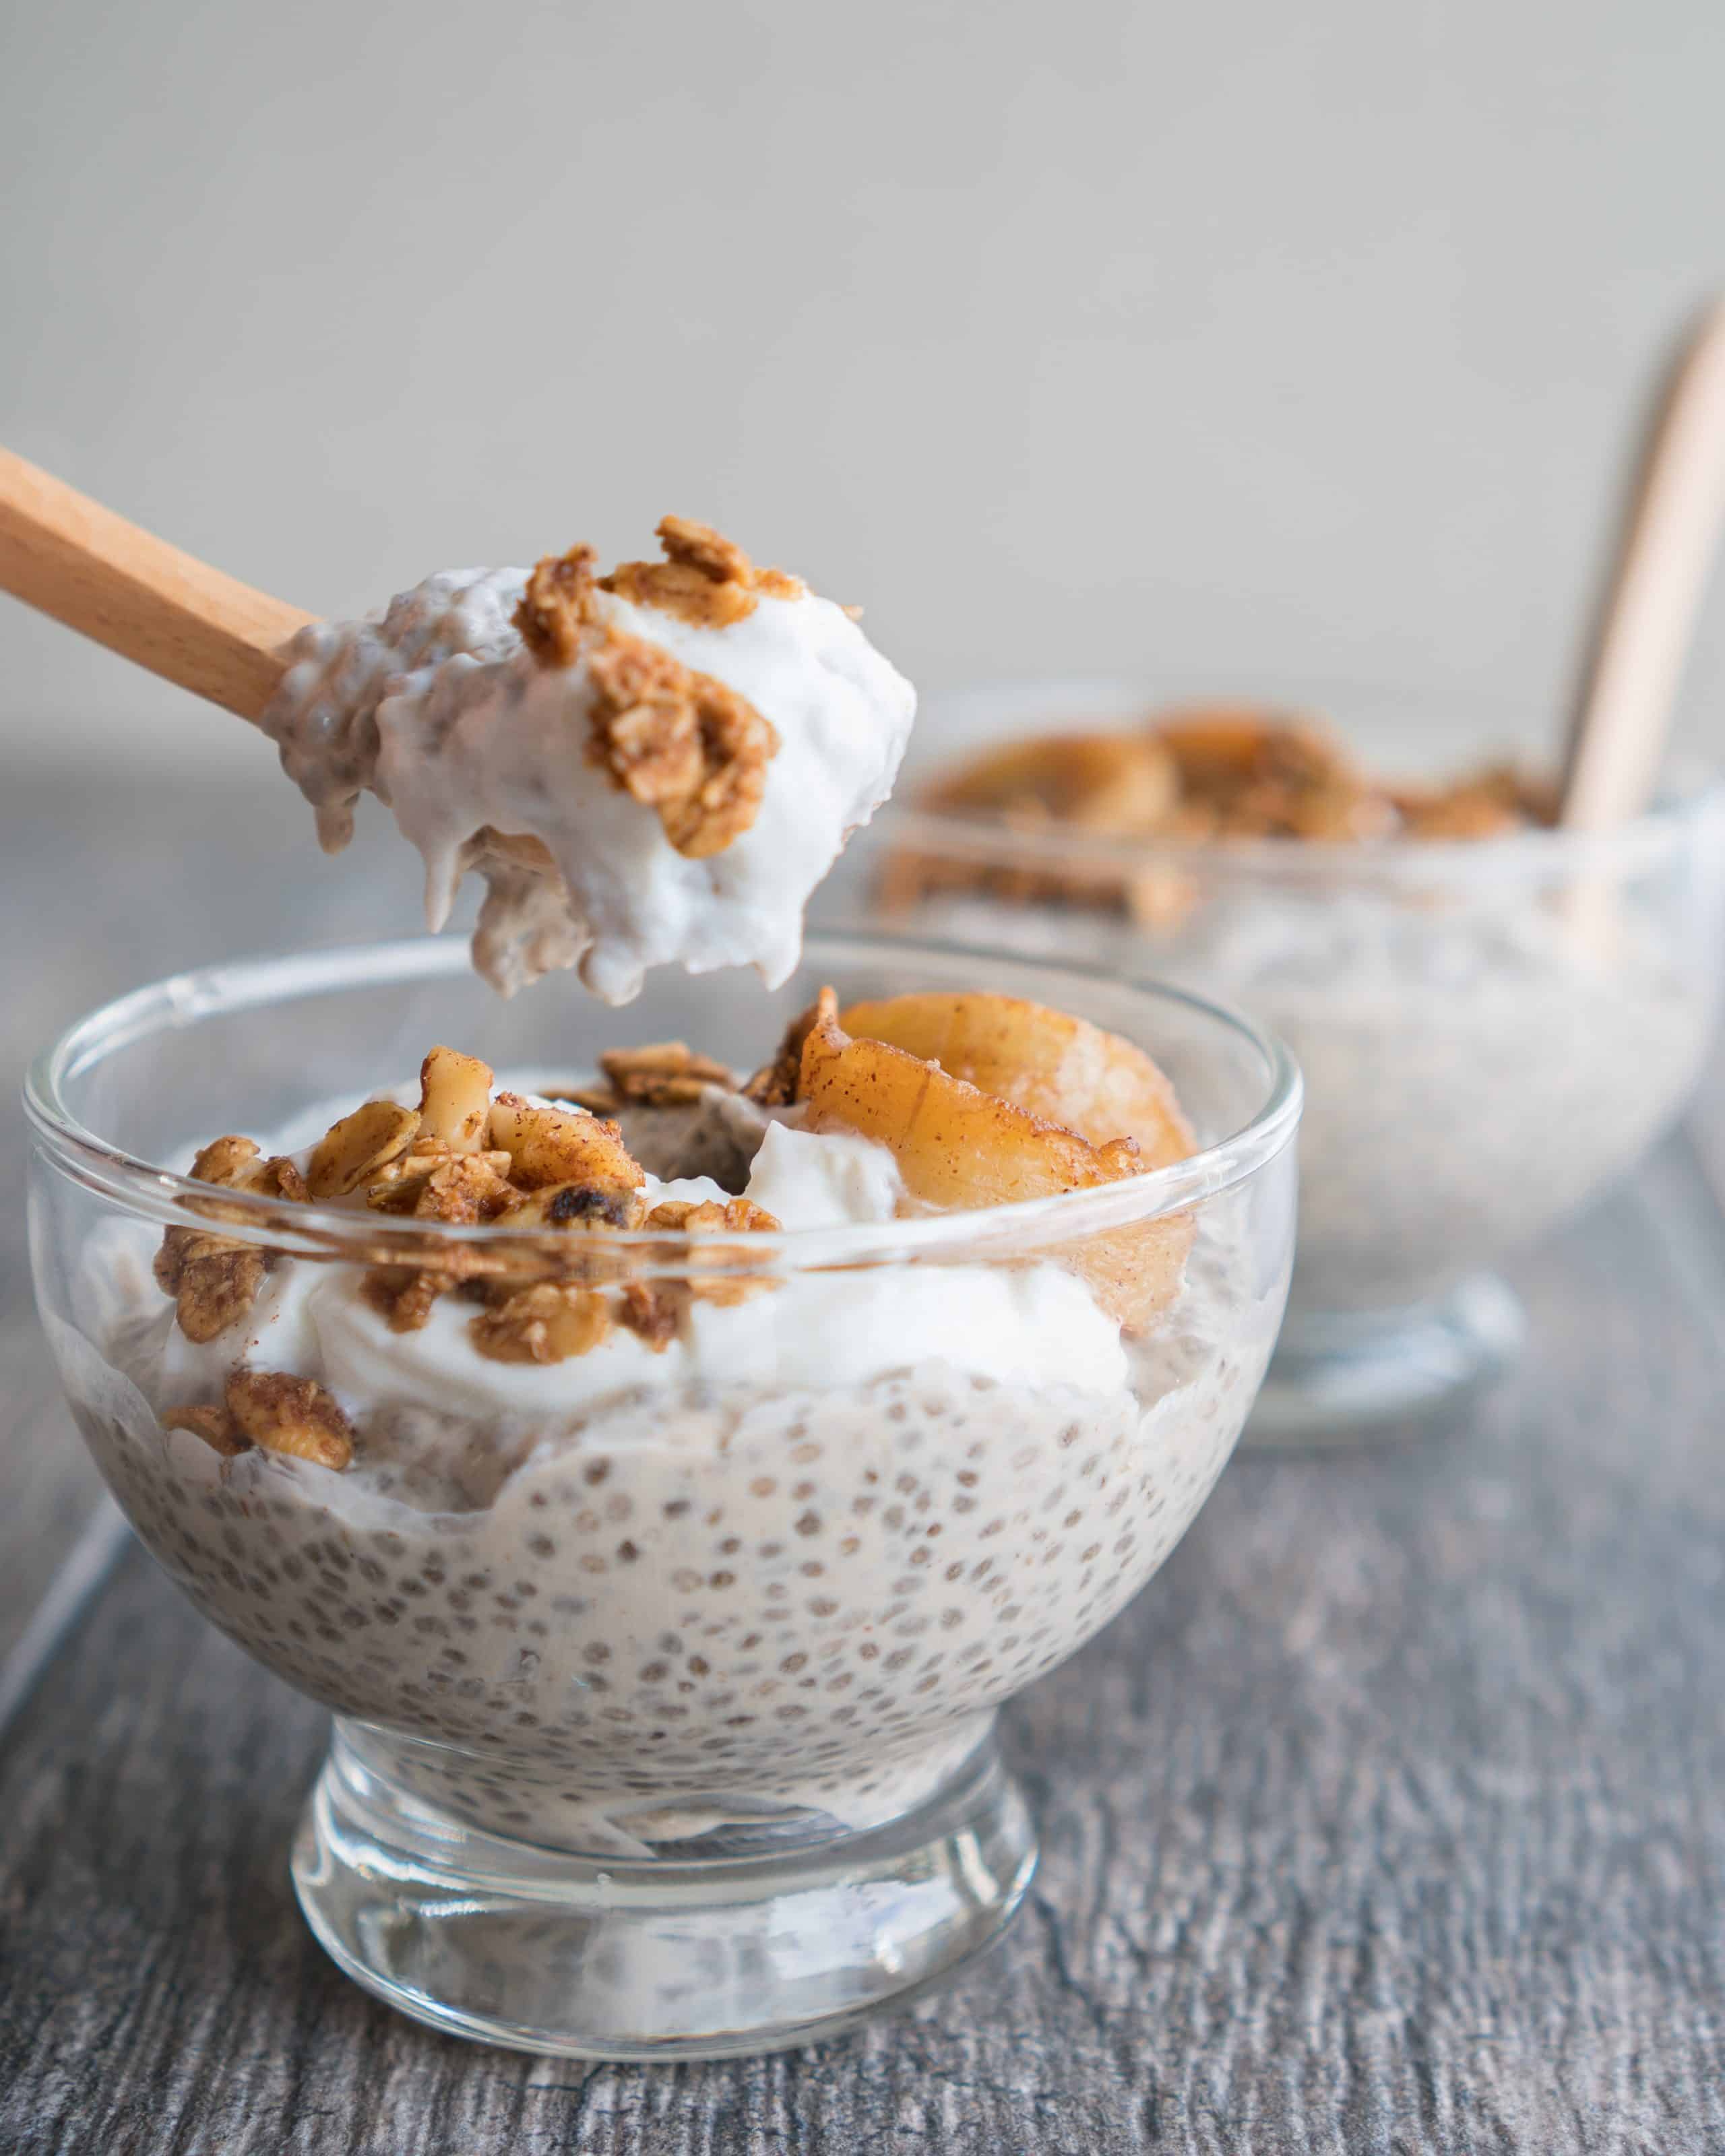 Chai Coconut Chia Pudding – Simple recipe for Chai Coconut Chia Pudding! A great prep-ahead recipe that can be layered with granola, yogurt, and fruit for a filling breakfast or healthy dessert. Lightly sweetened with honey, flavored with chai tea, spiced with cinnamon, and a hint of vanilla. We love that this pudding is gluten-free, refined sugar free, and vegan-friendly! ♥ | freeyourfork.com